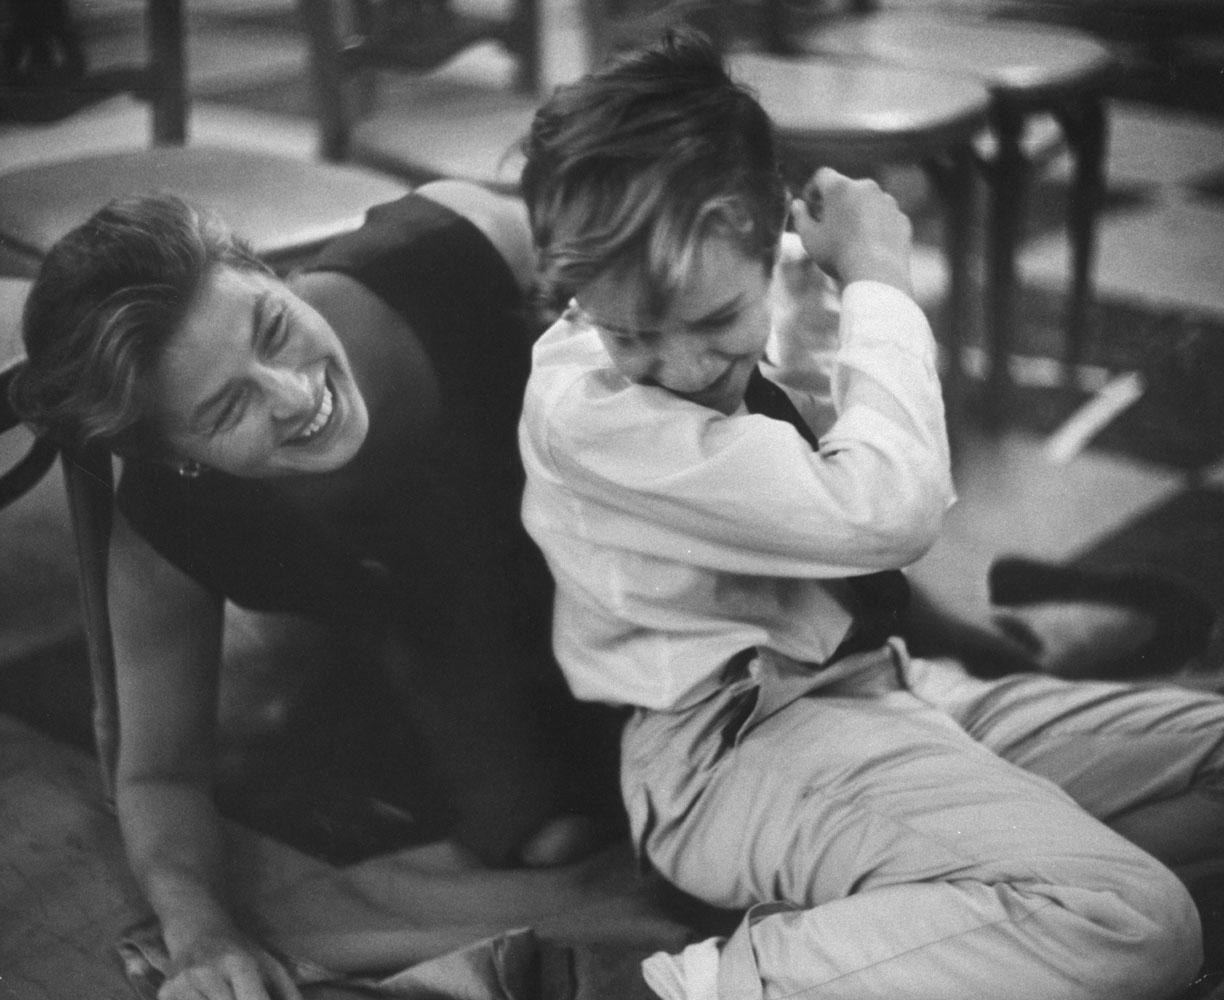 Ingrid Bergman plays with a child actor between scenes of the taping of John Frankenheimer's 1959 TV movie, The Turn of the Screw, for which she won an Emmy.